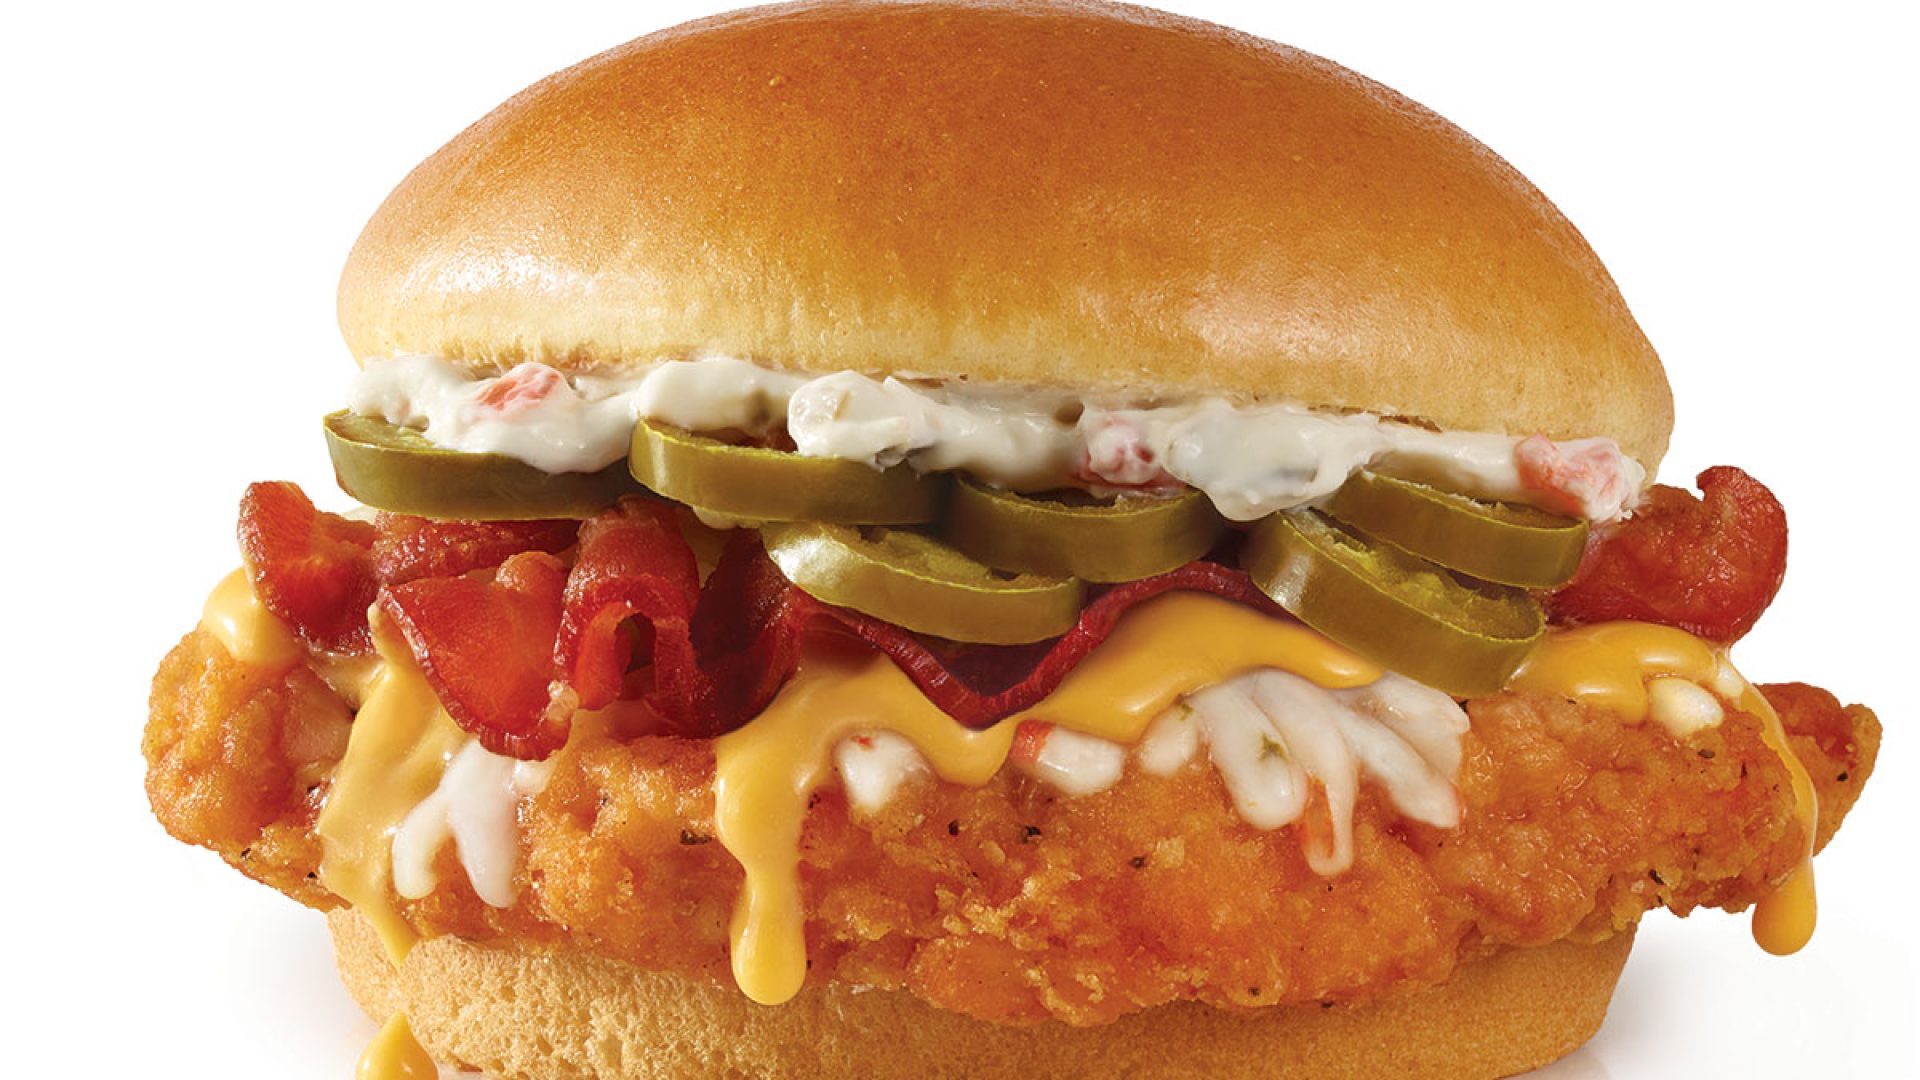 7 New FastFood Chicken Sandwiches Everyone's Talking About